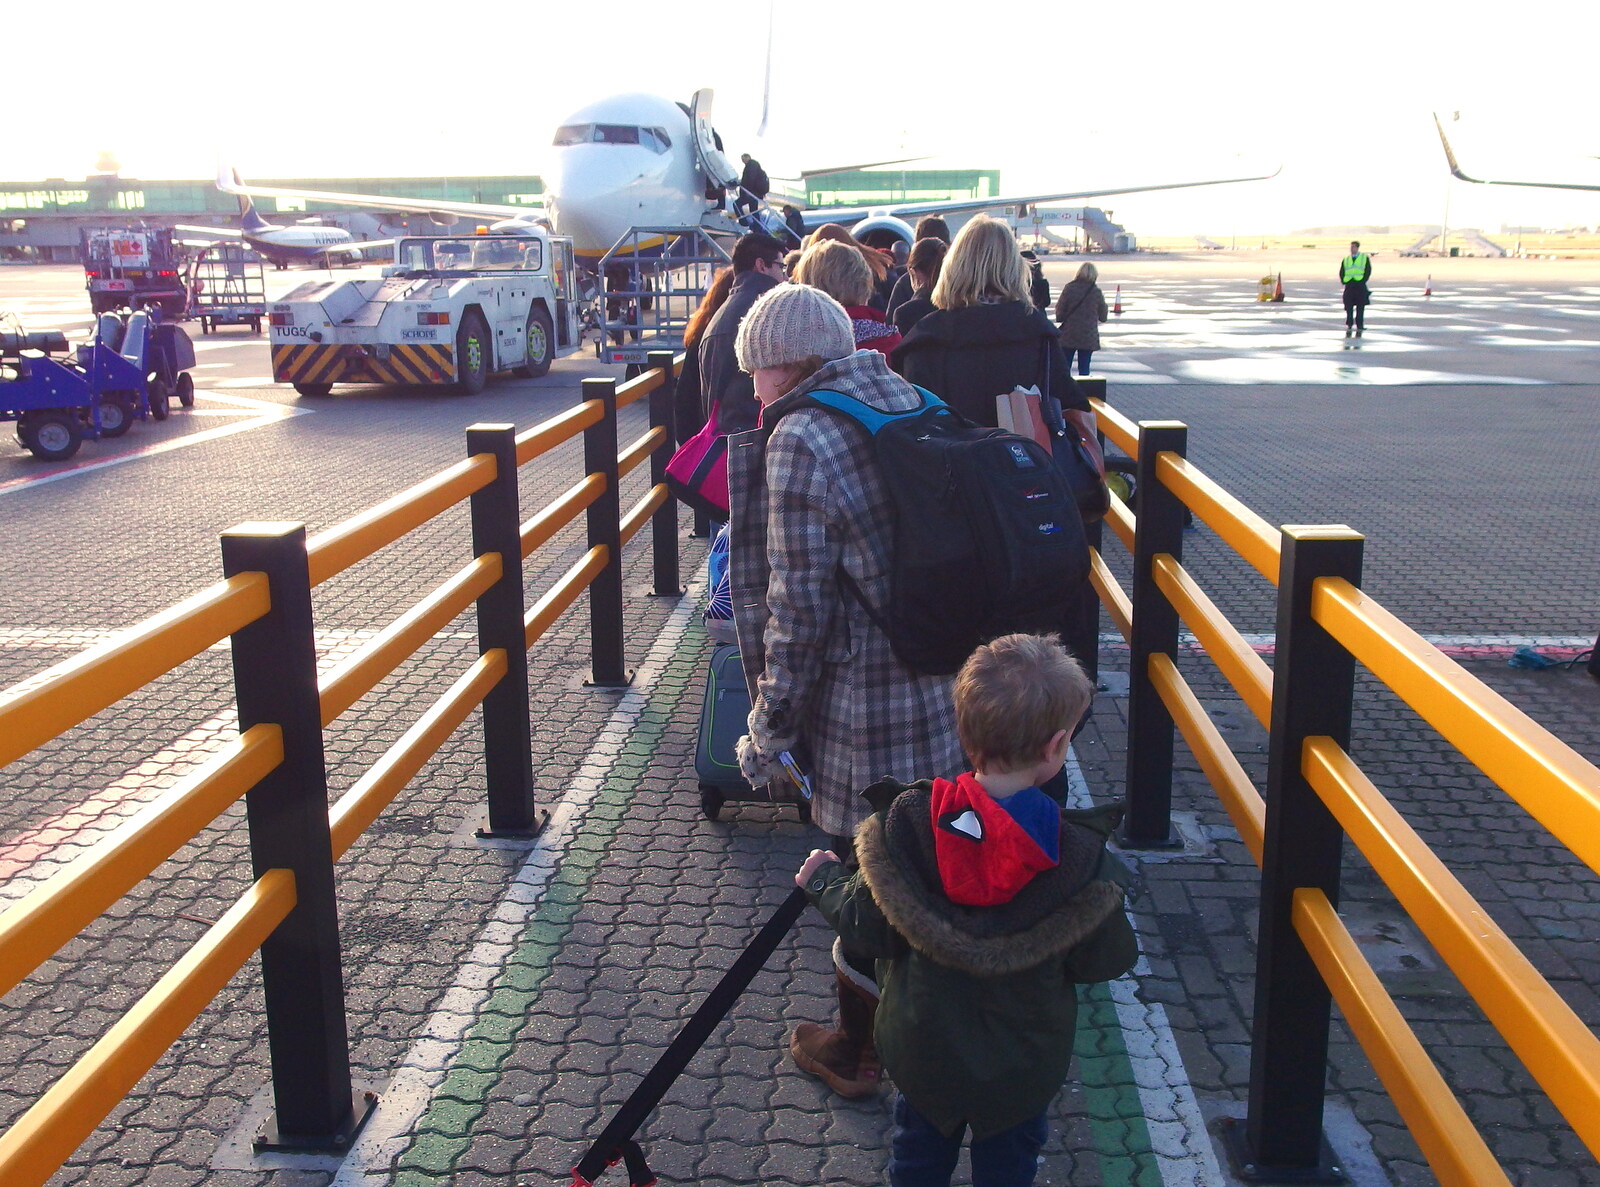 The queue to board at Stansted from A Trip to Monkstown Farm and Blackrock, County Dublin, Ireland - 2nd January 2014